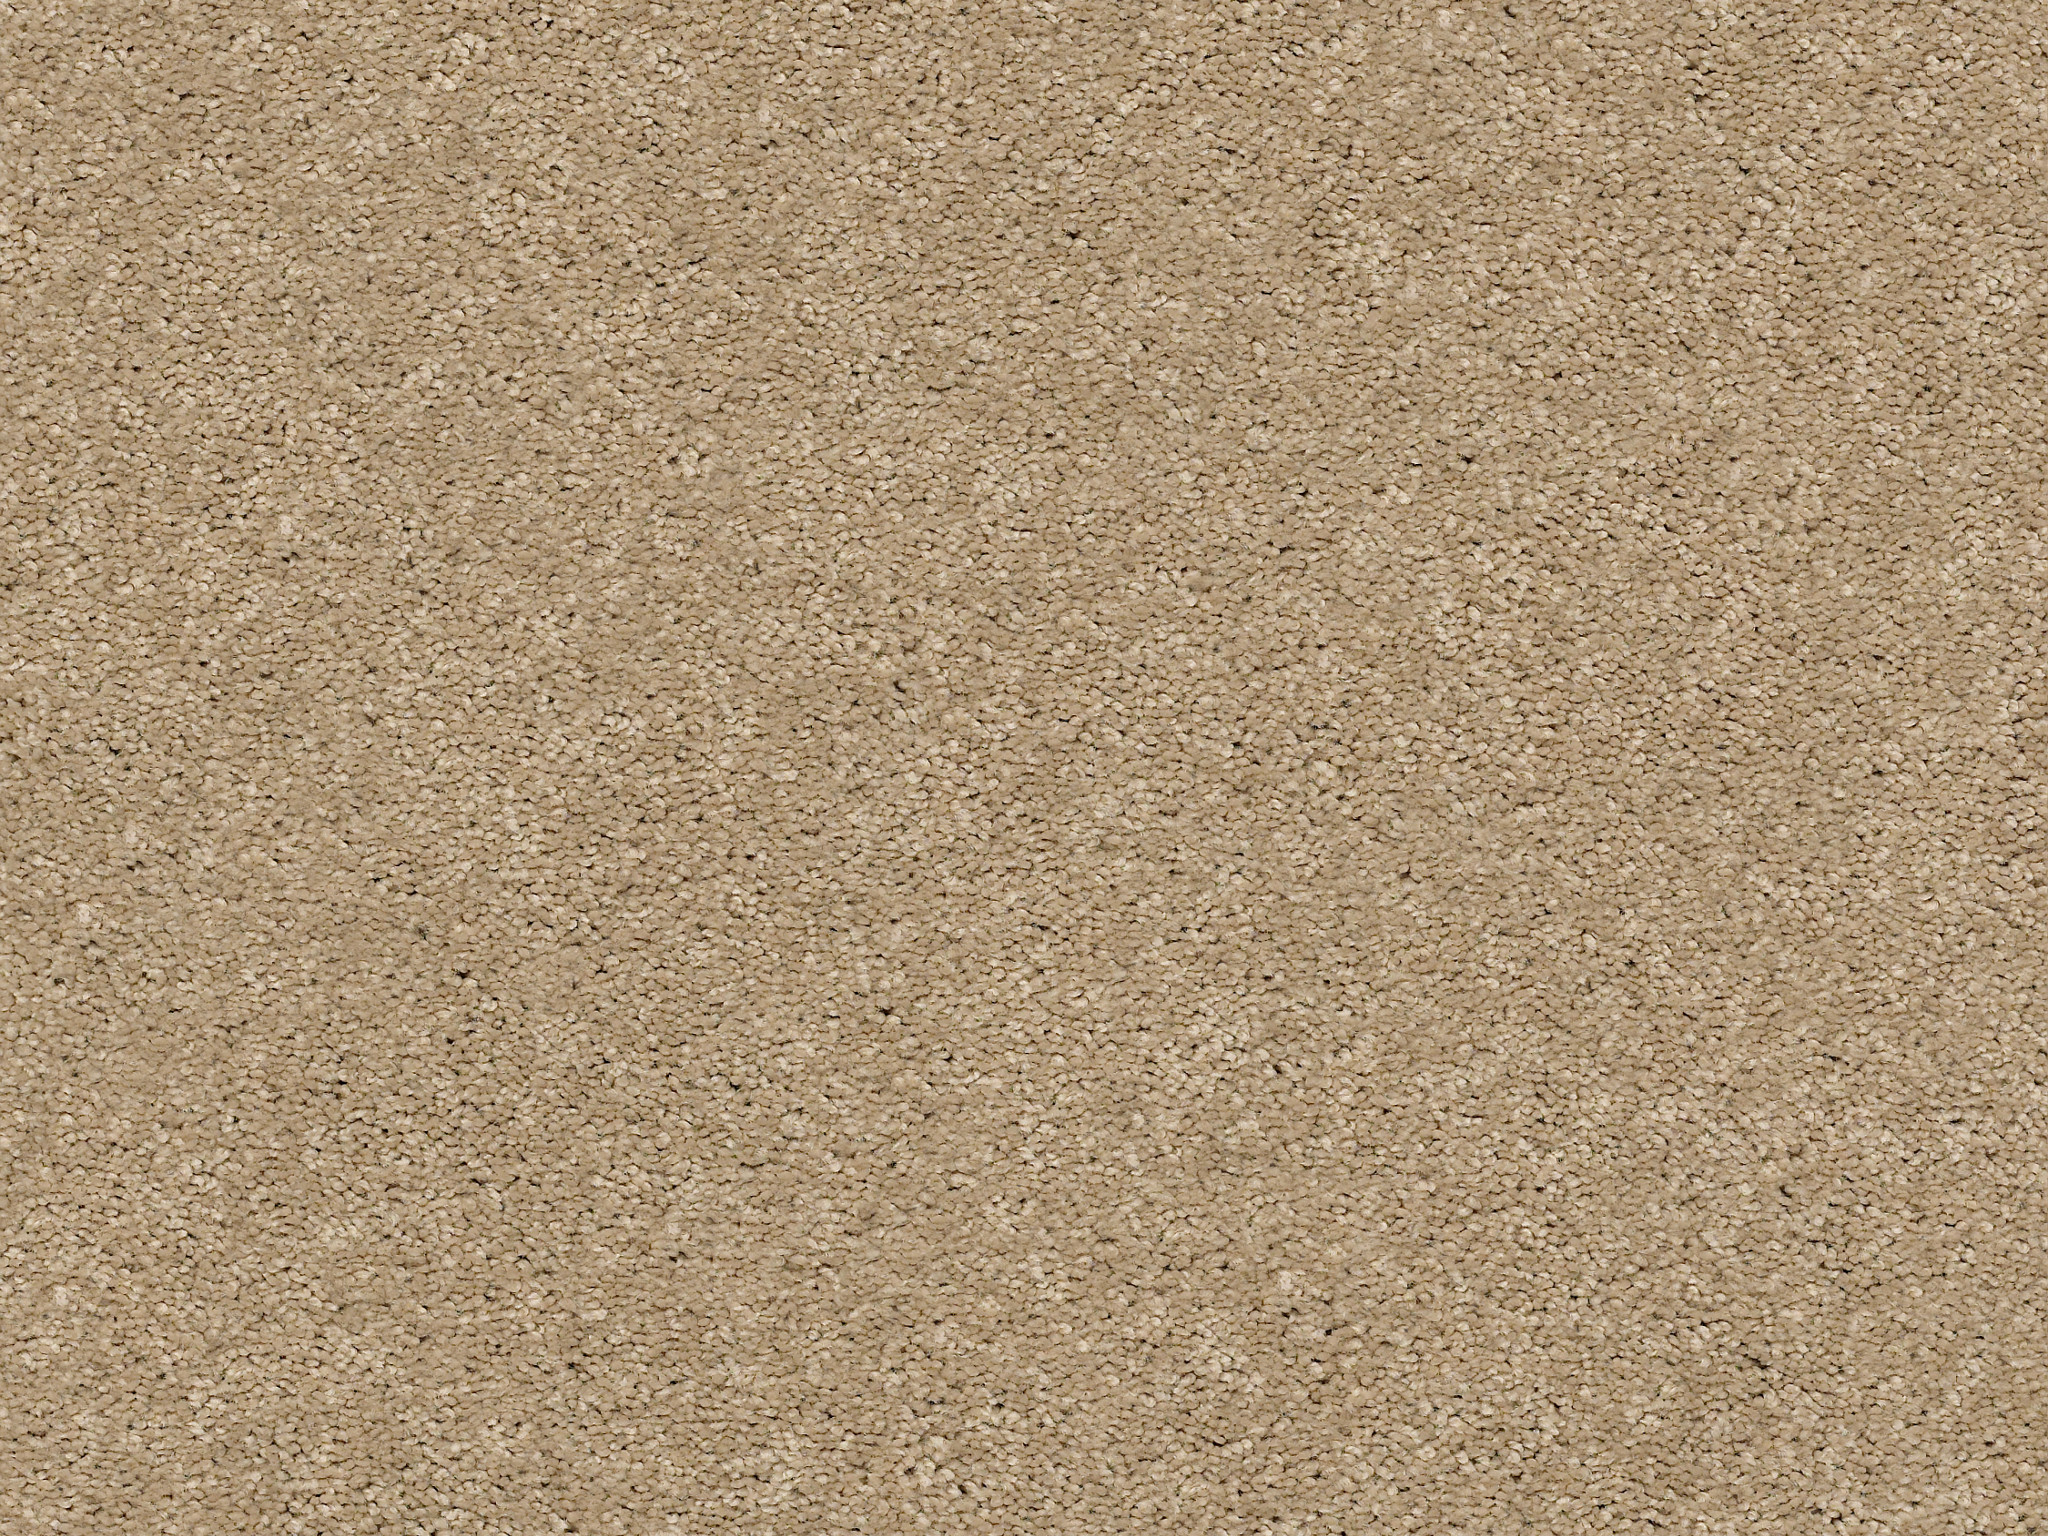 First Act Carpet - Coronado Zoomed Swatch Image